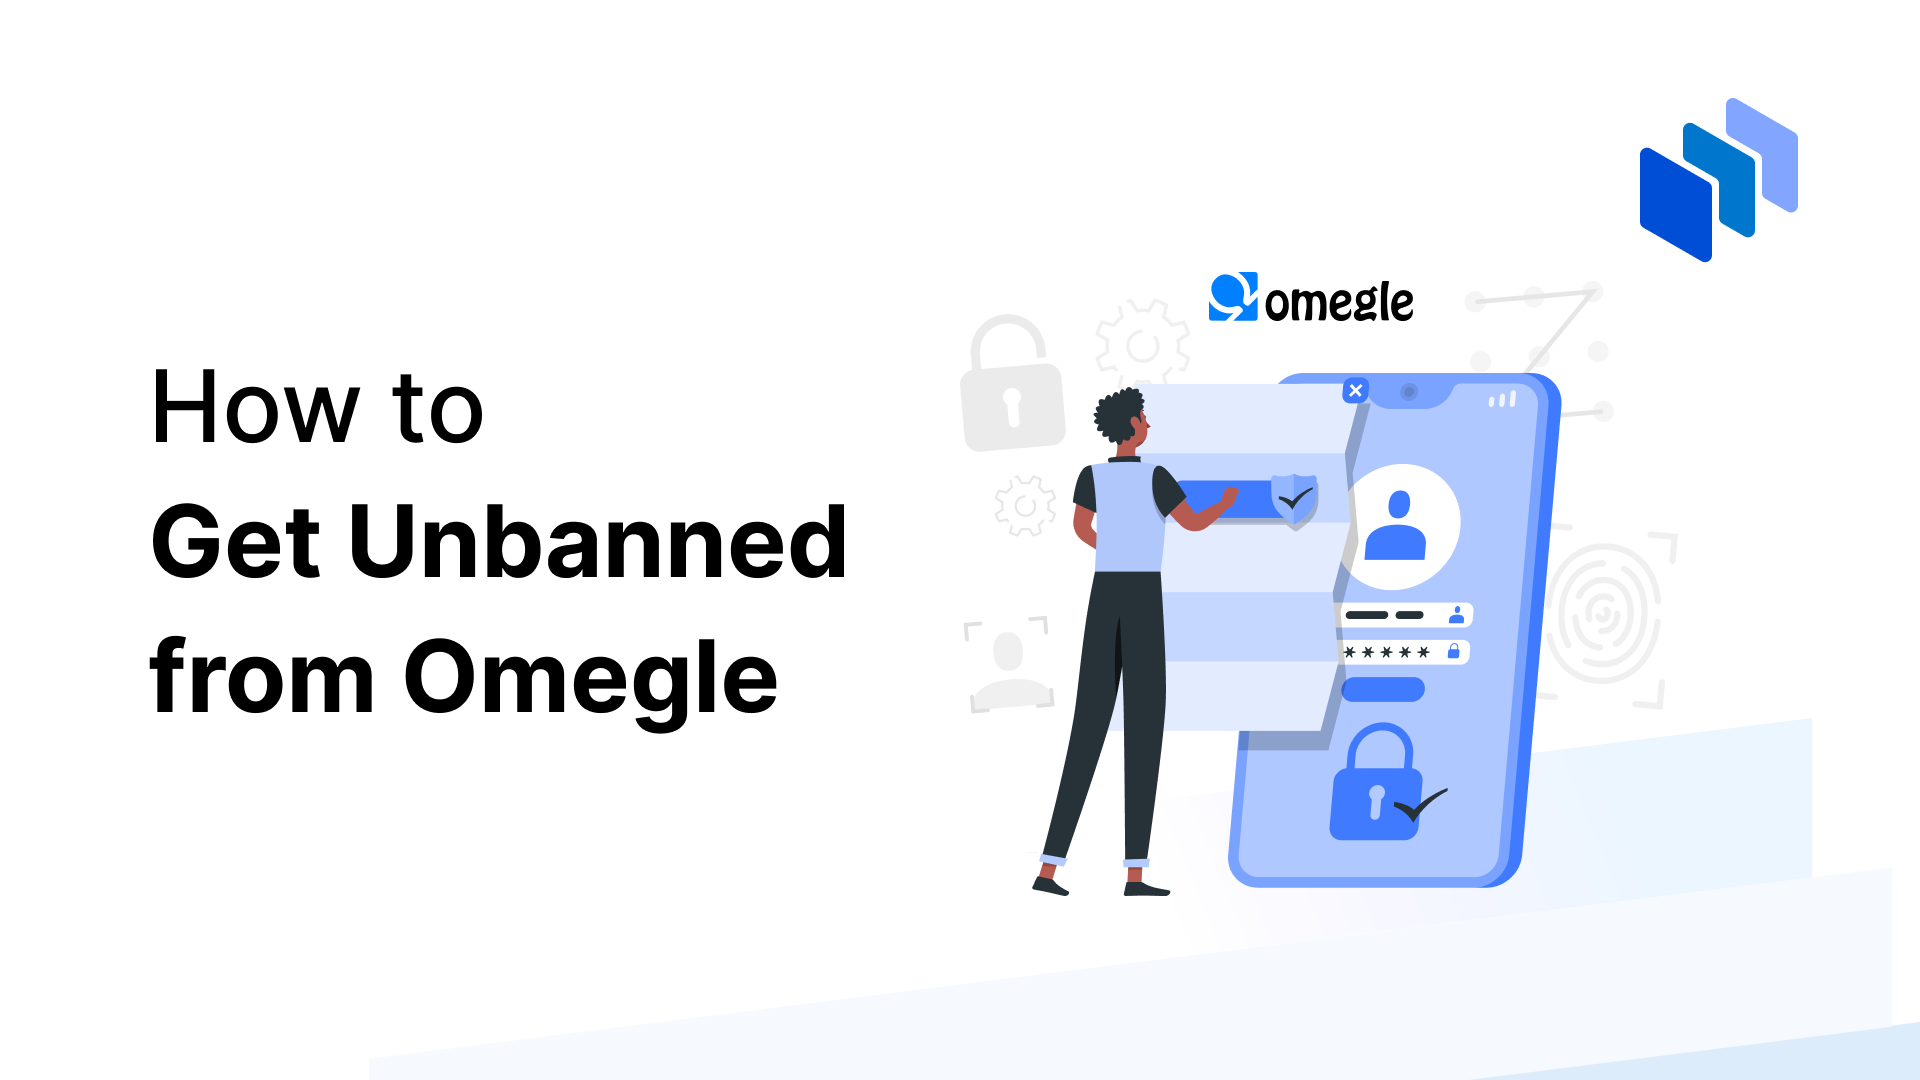 How to get unbanned from Omegle for free?